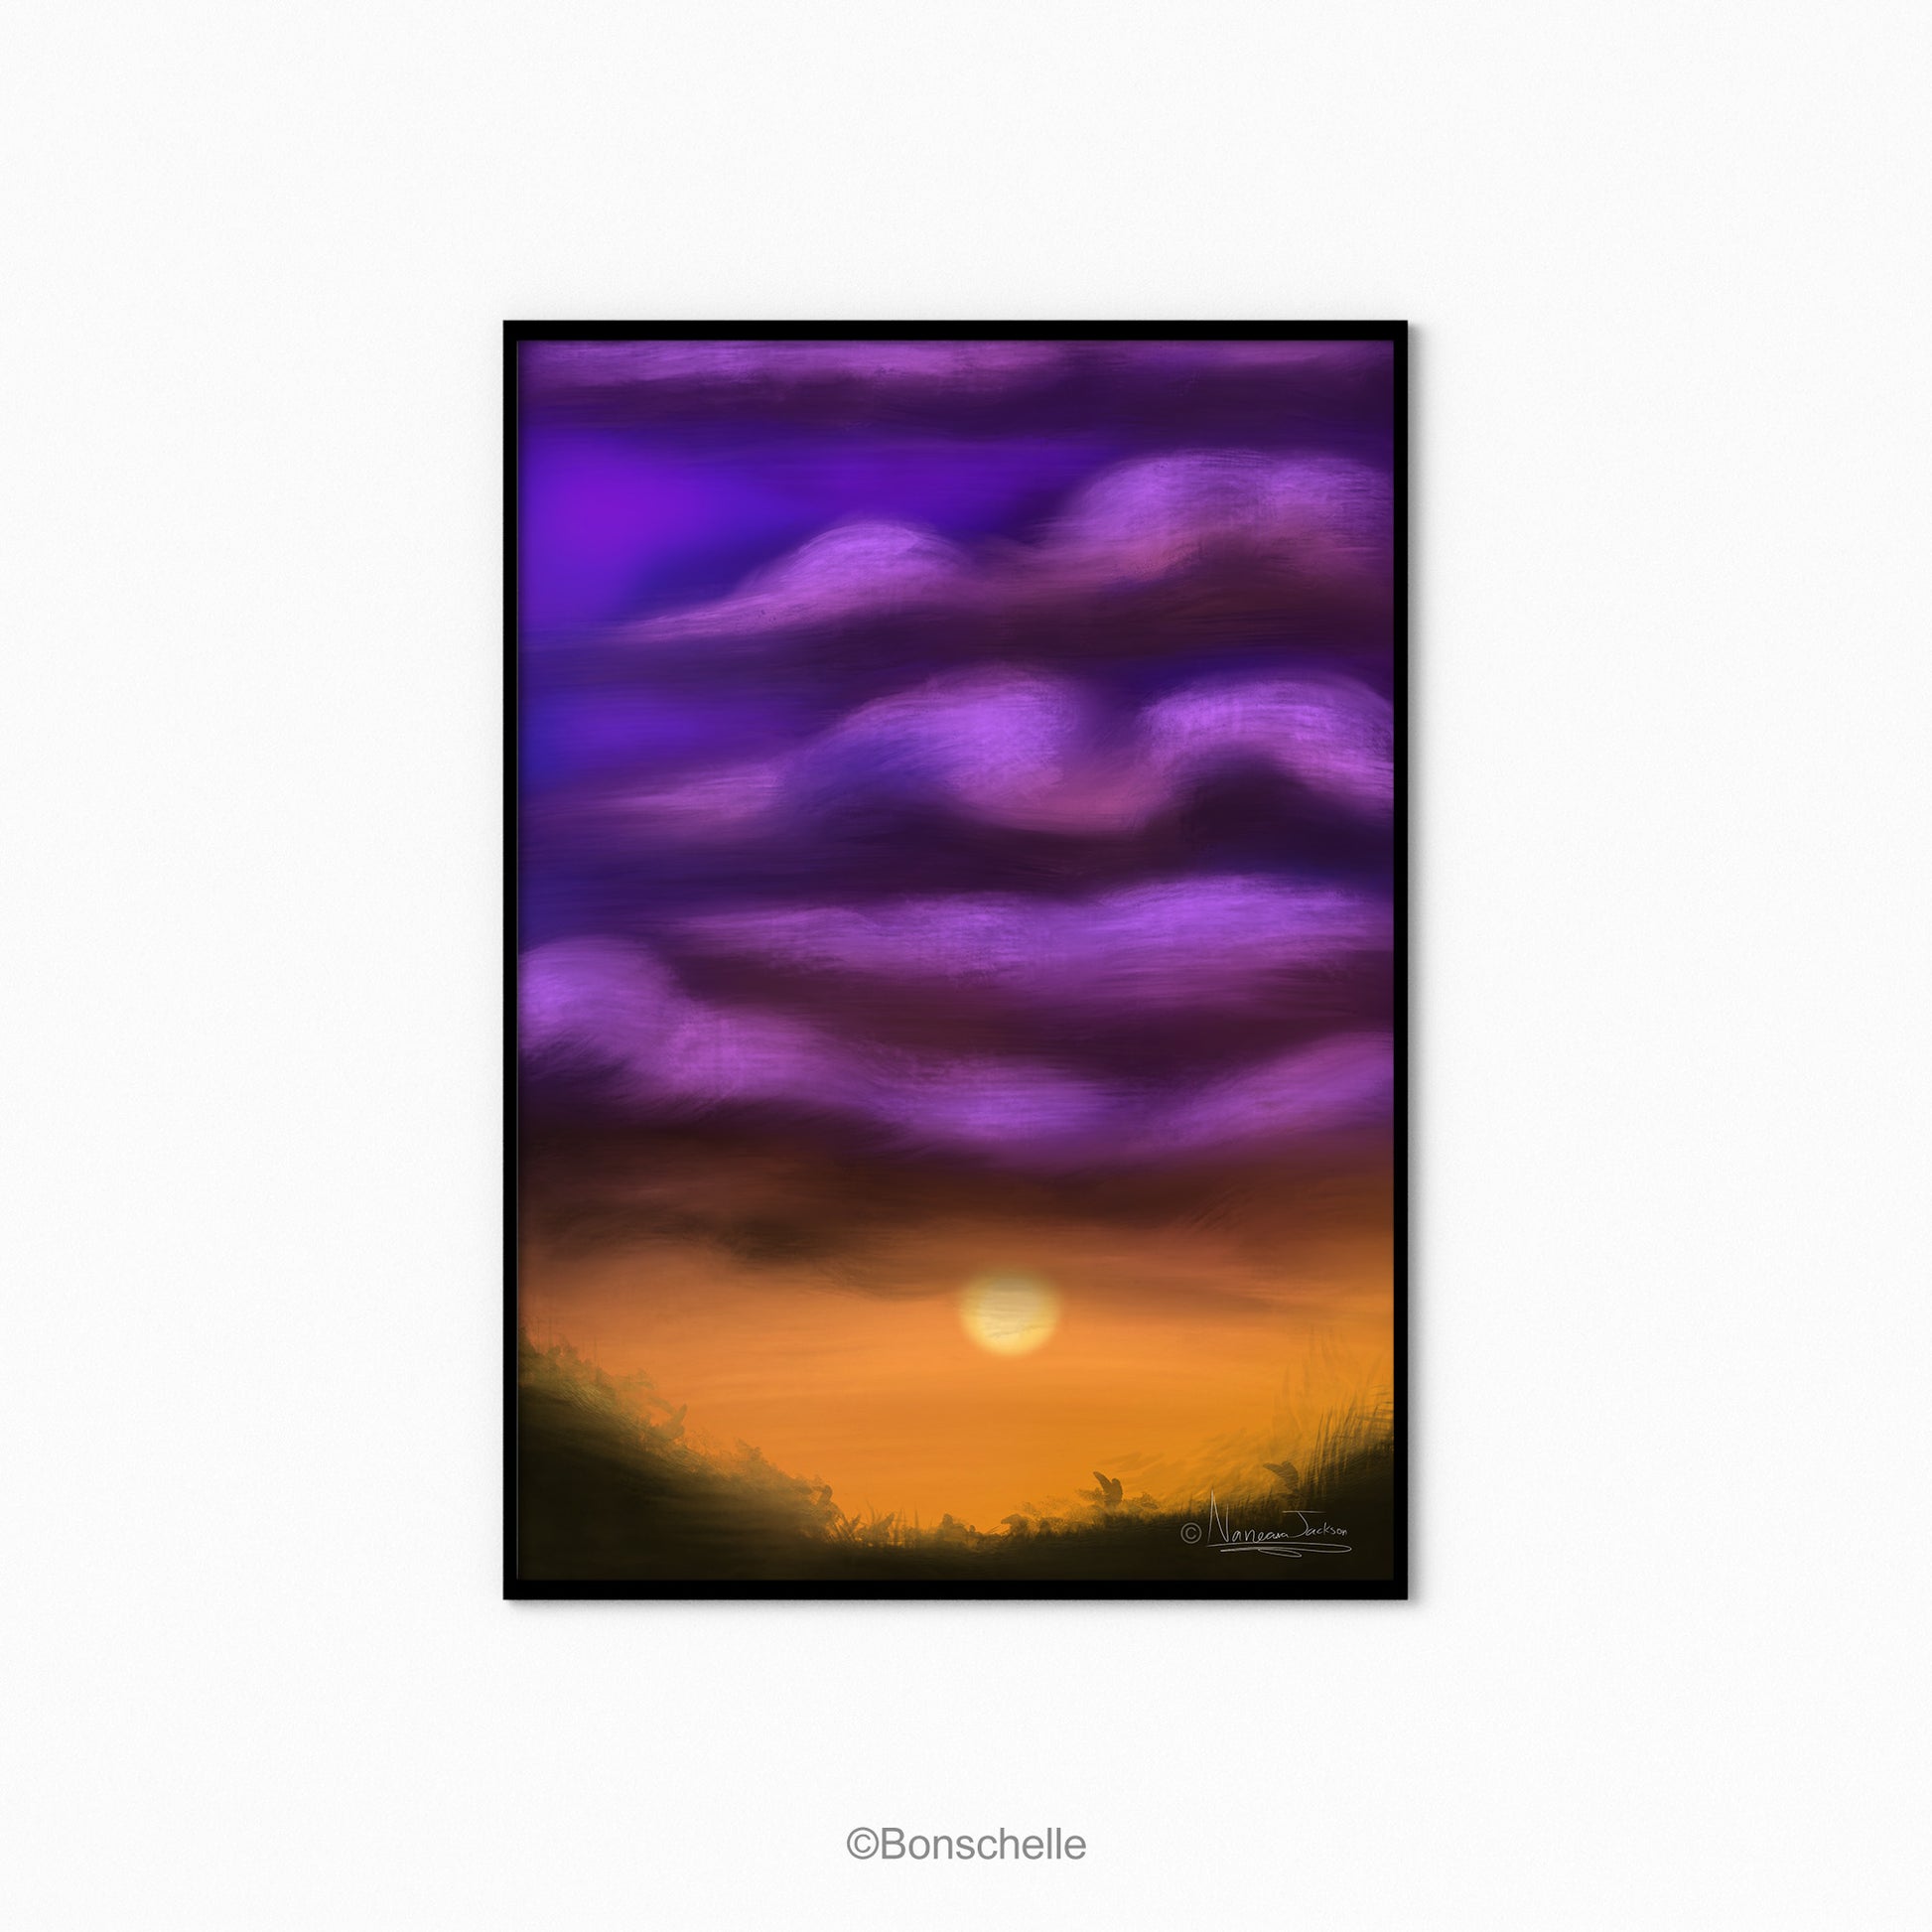 Original Art Poster showing an orange and purple sky with a setting sun in a thin black frame